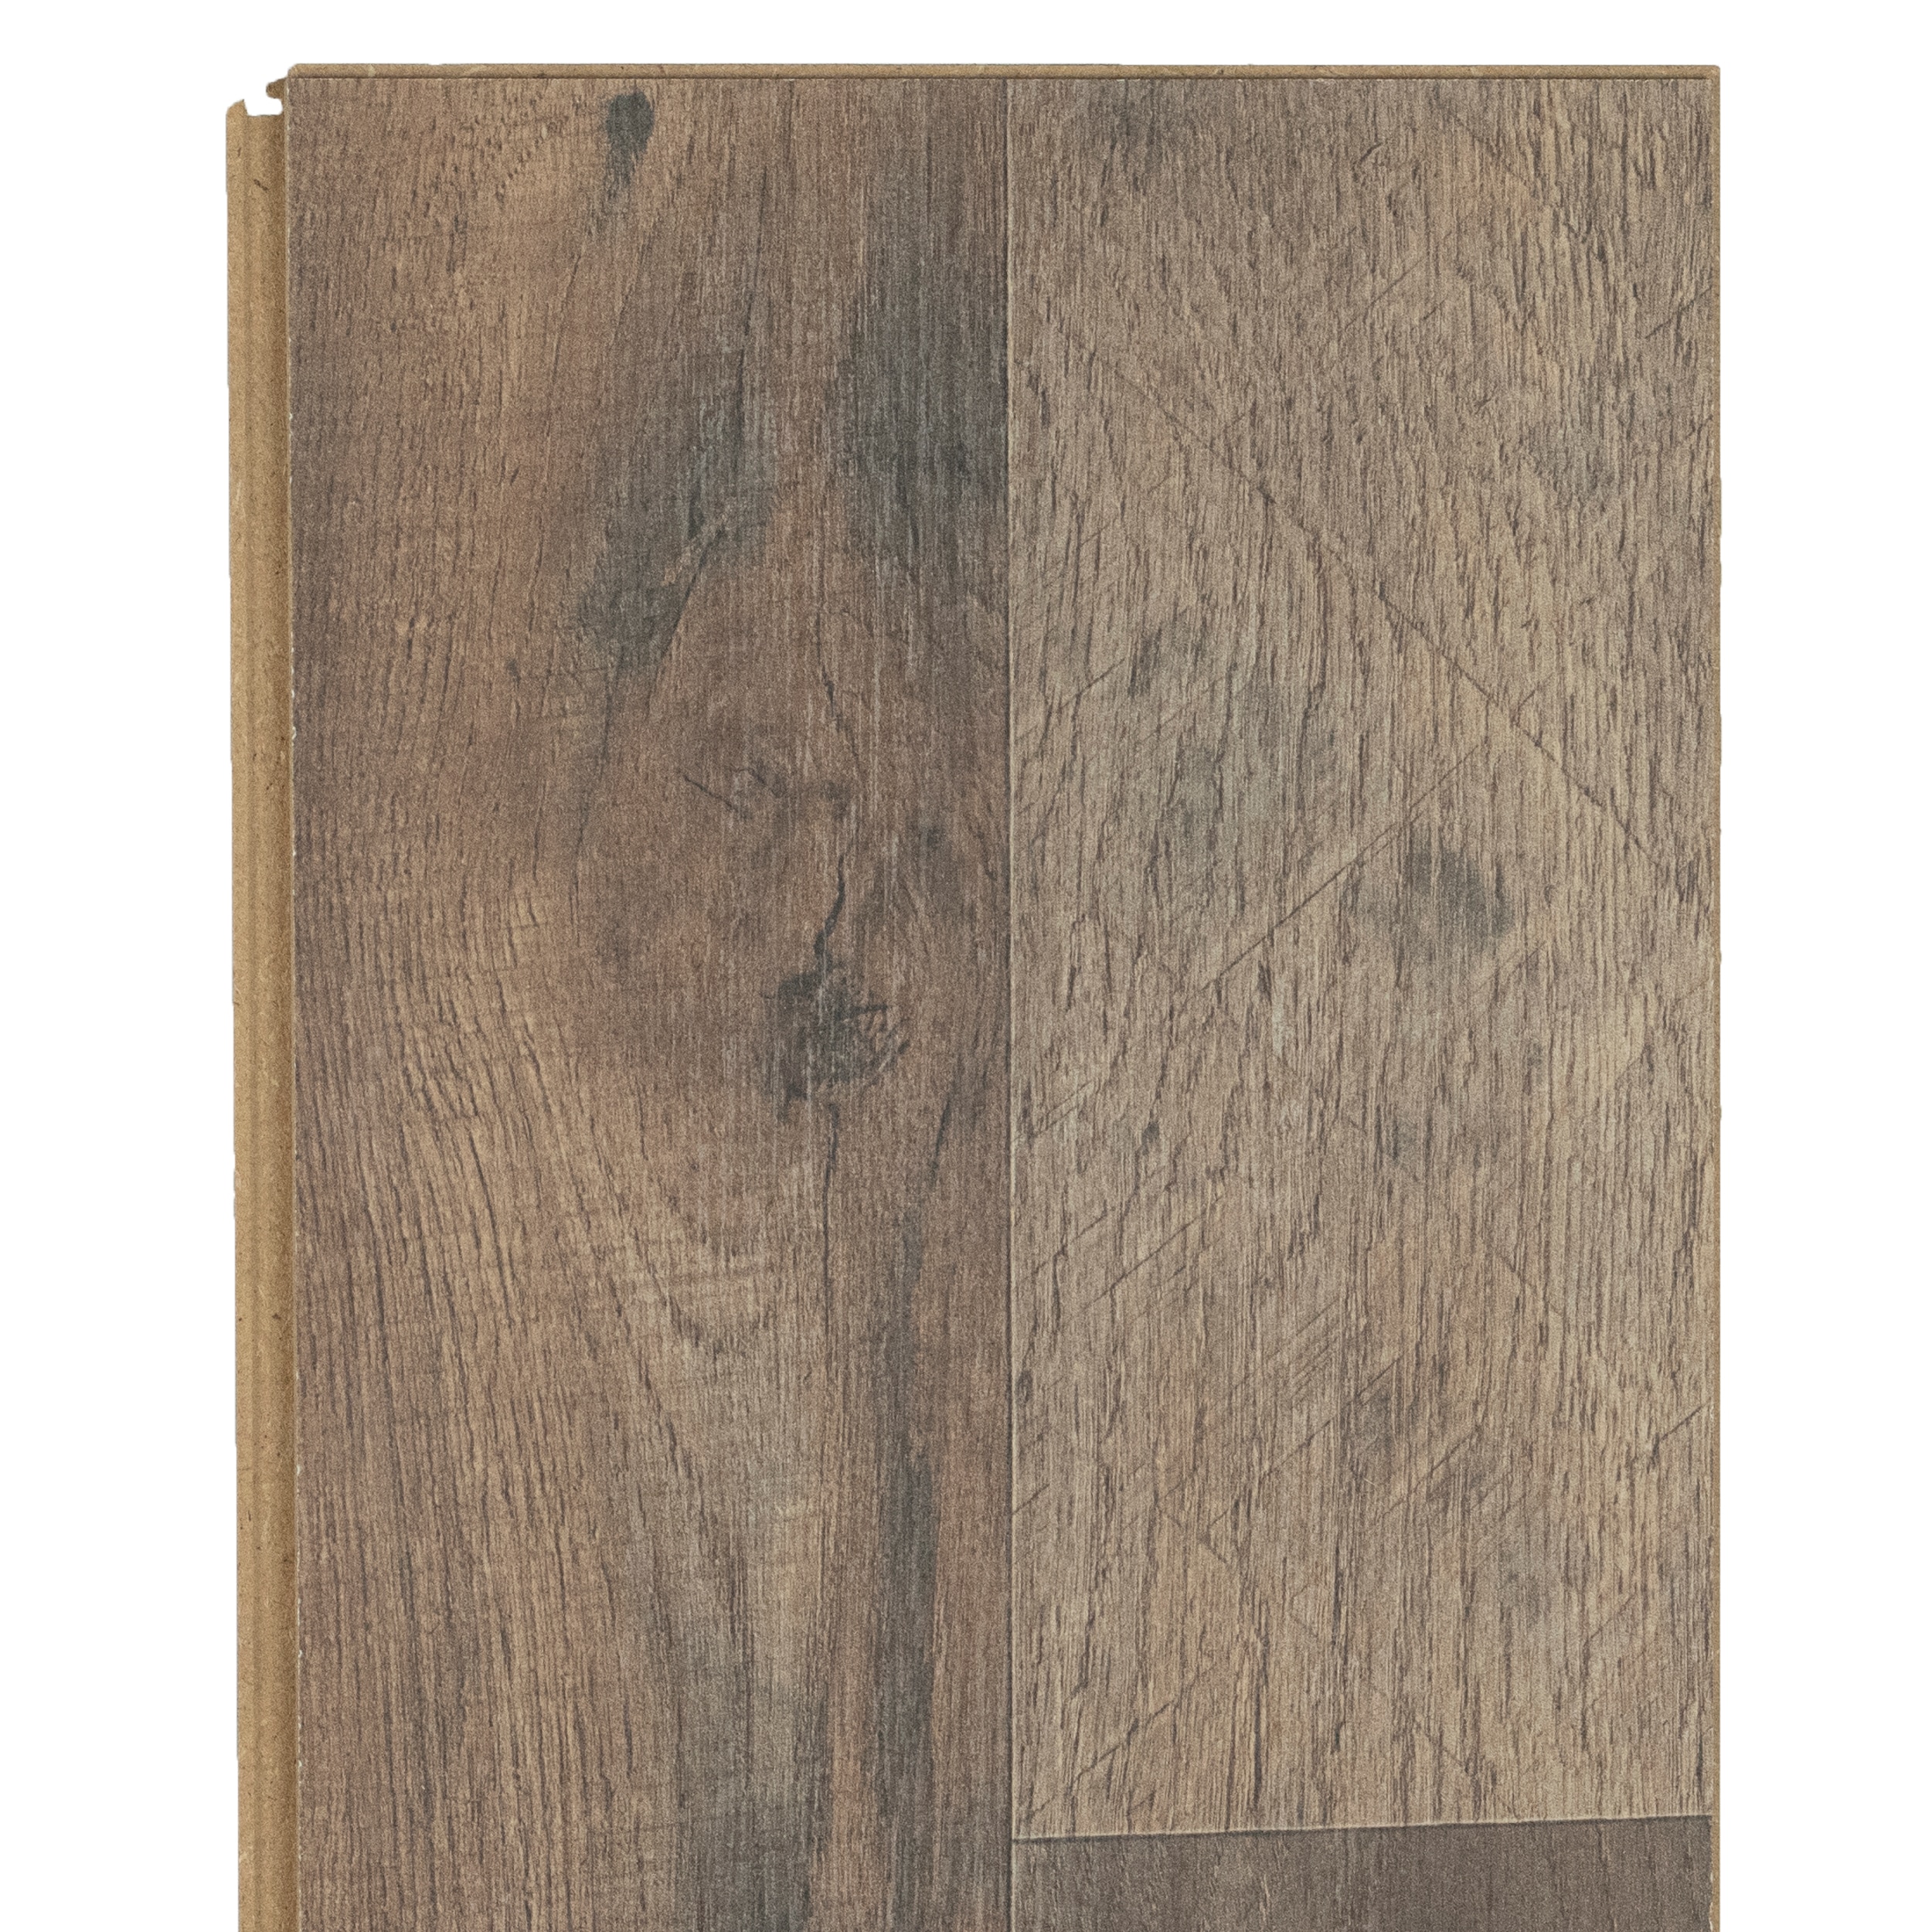 Florian Oak 7-mm Thick Wood Plank 8-in W x 48-in L Laminate Flooring (23.91-sq  ft) in the Laminate Flooring department at Lowes.com